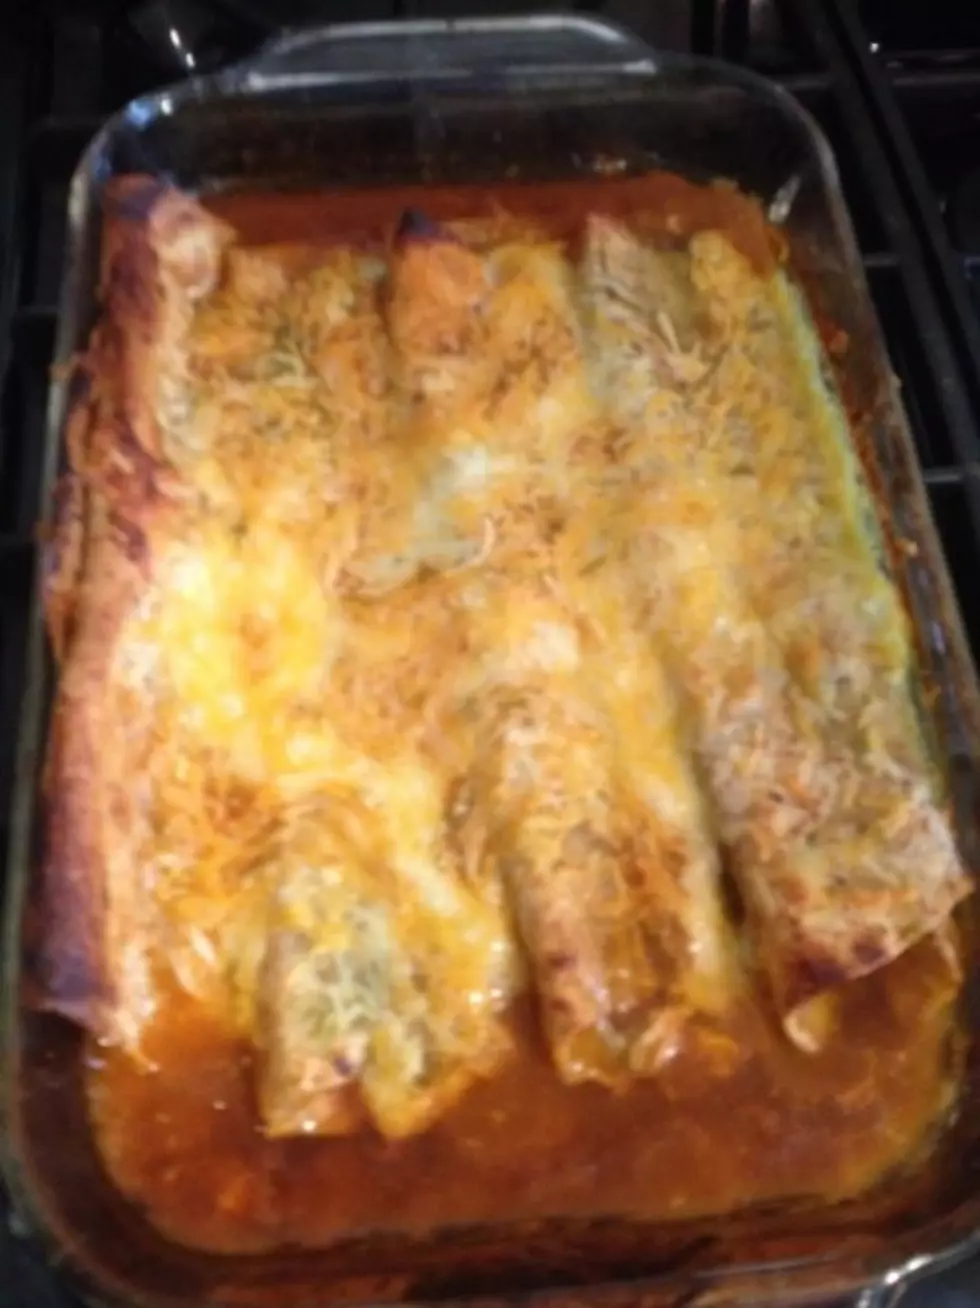 South Park&#8217;s Cheesy Poof Enchilada Recipe (Minus the Poofs)